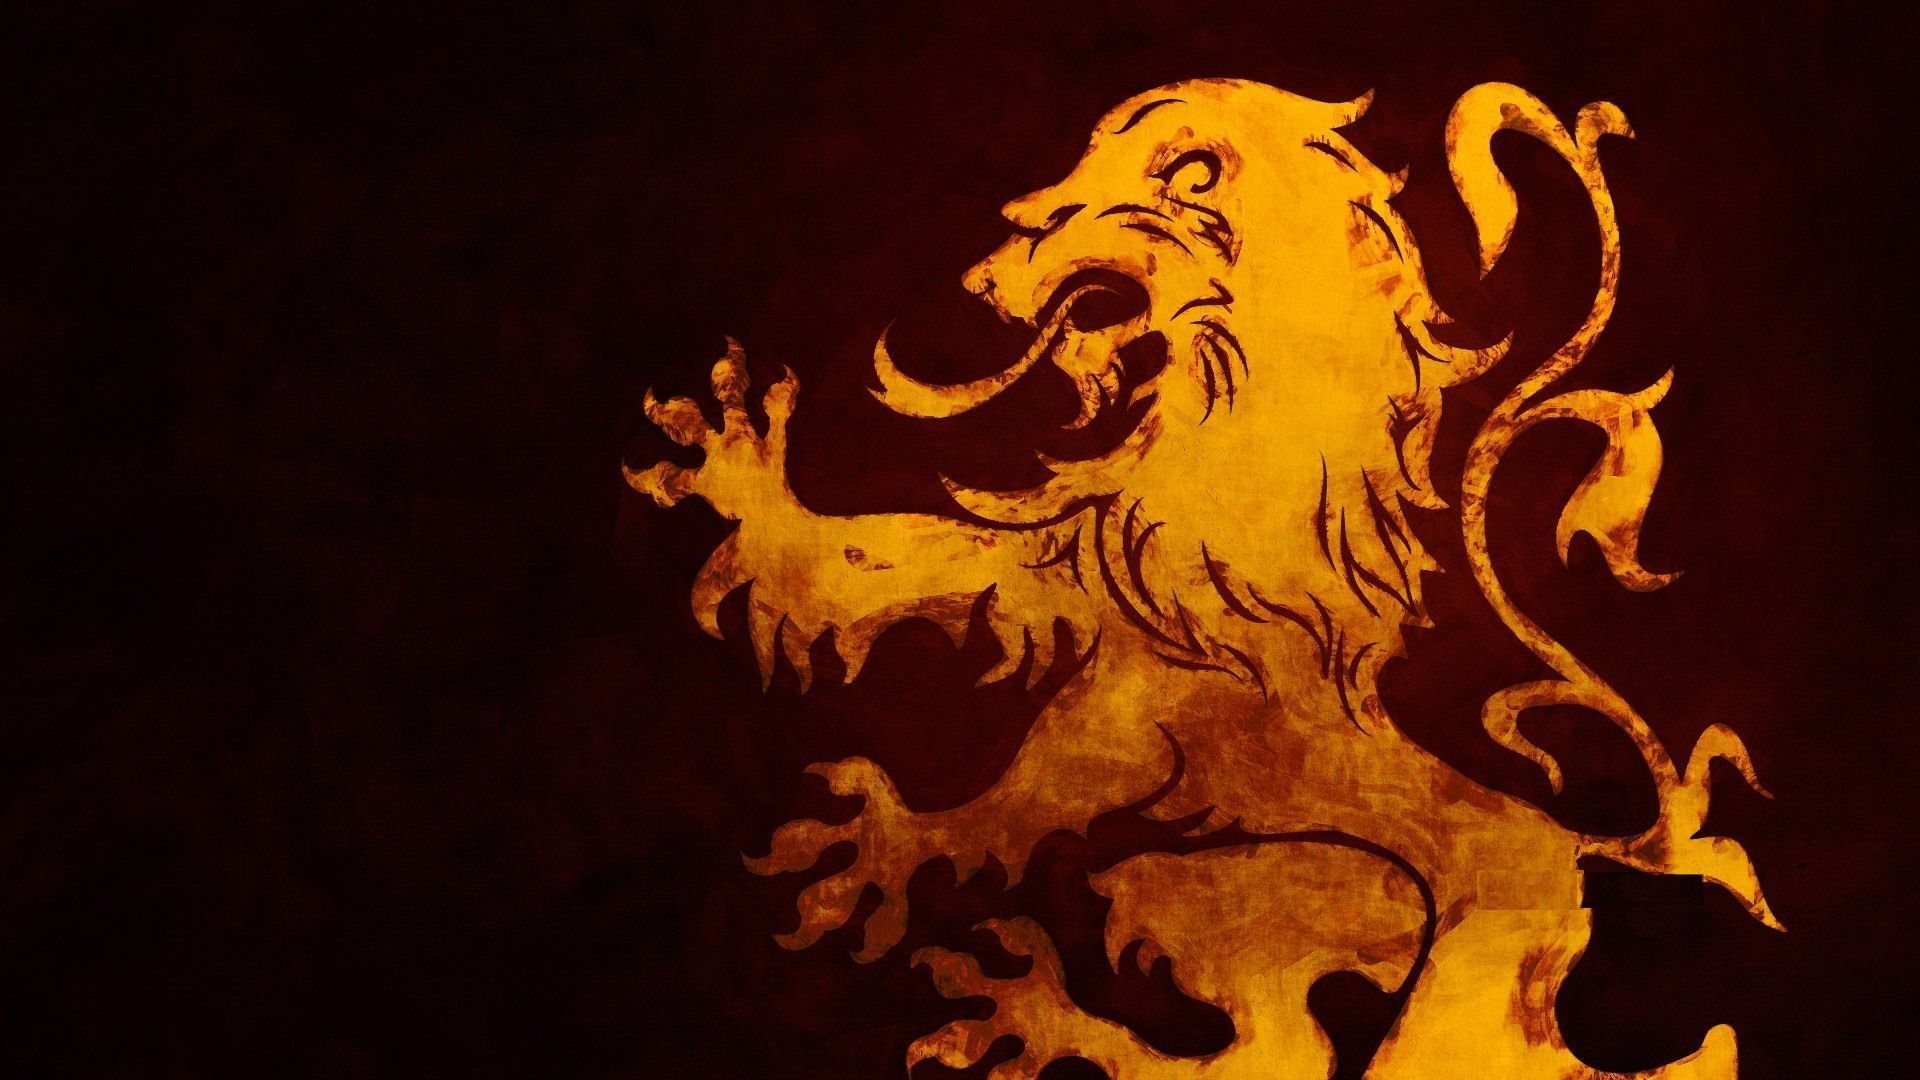 Game Of Thrones HD Wallpaper, Game Of Thrones Images, New Backgrounds